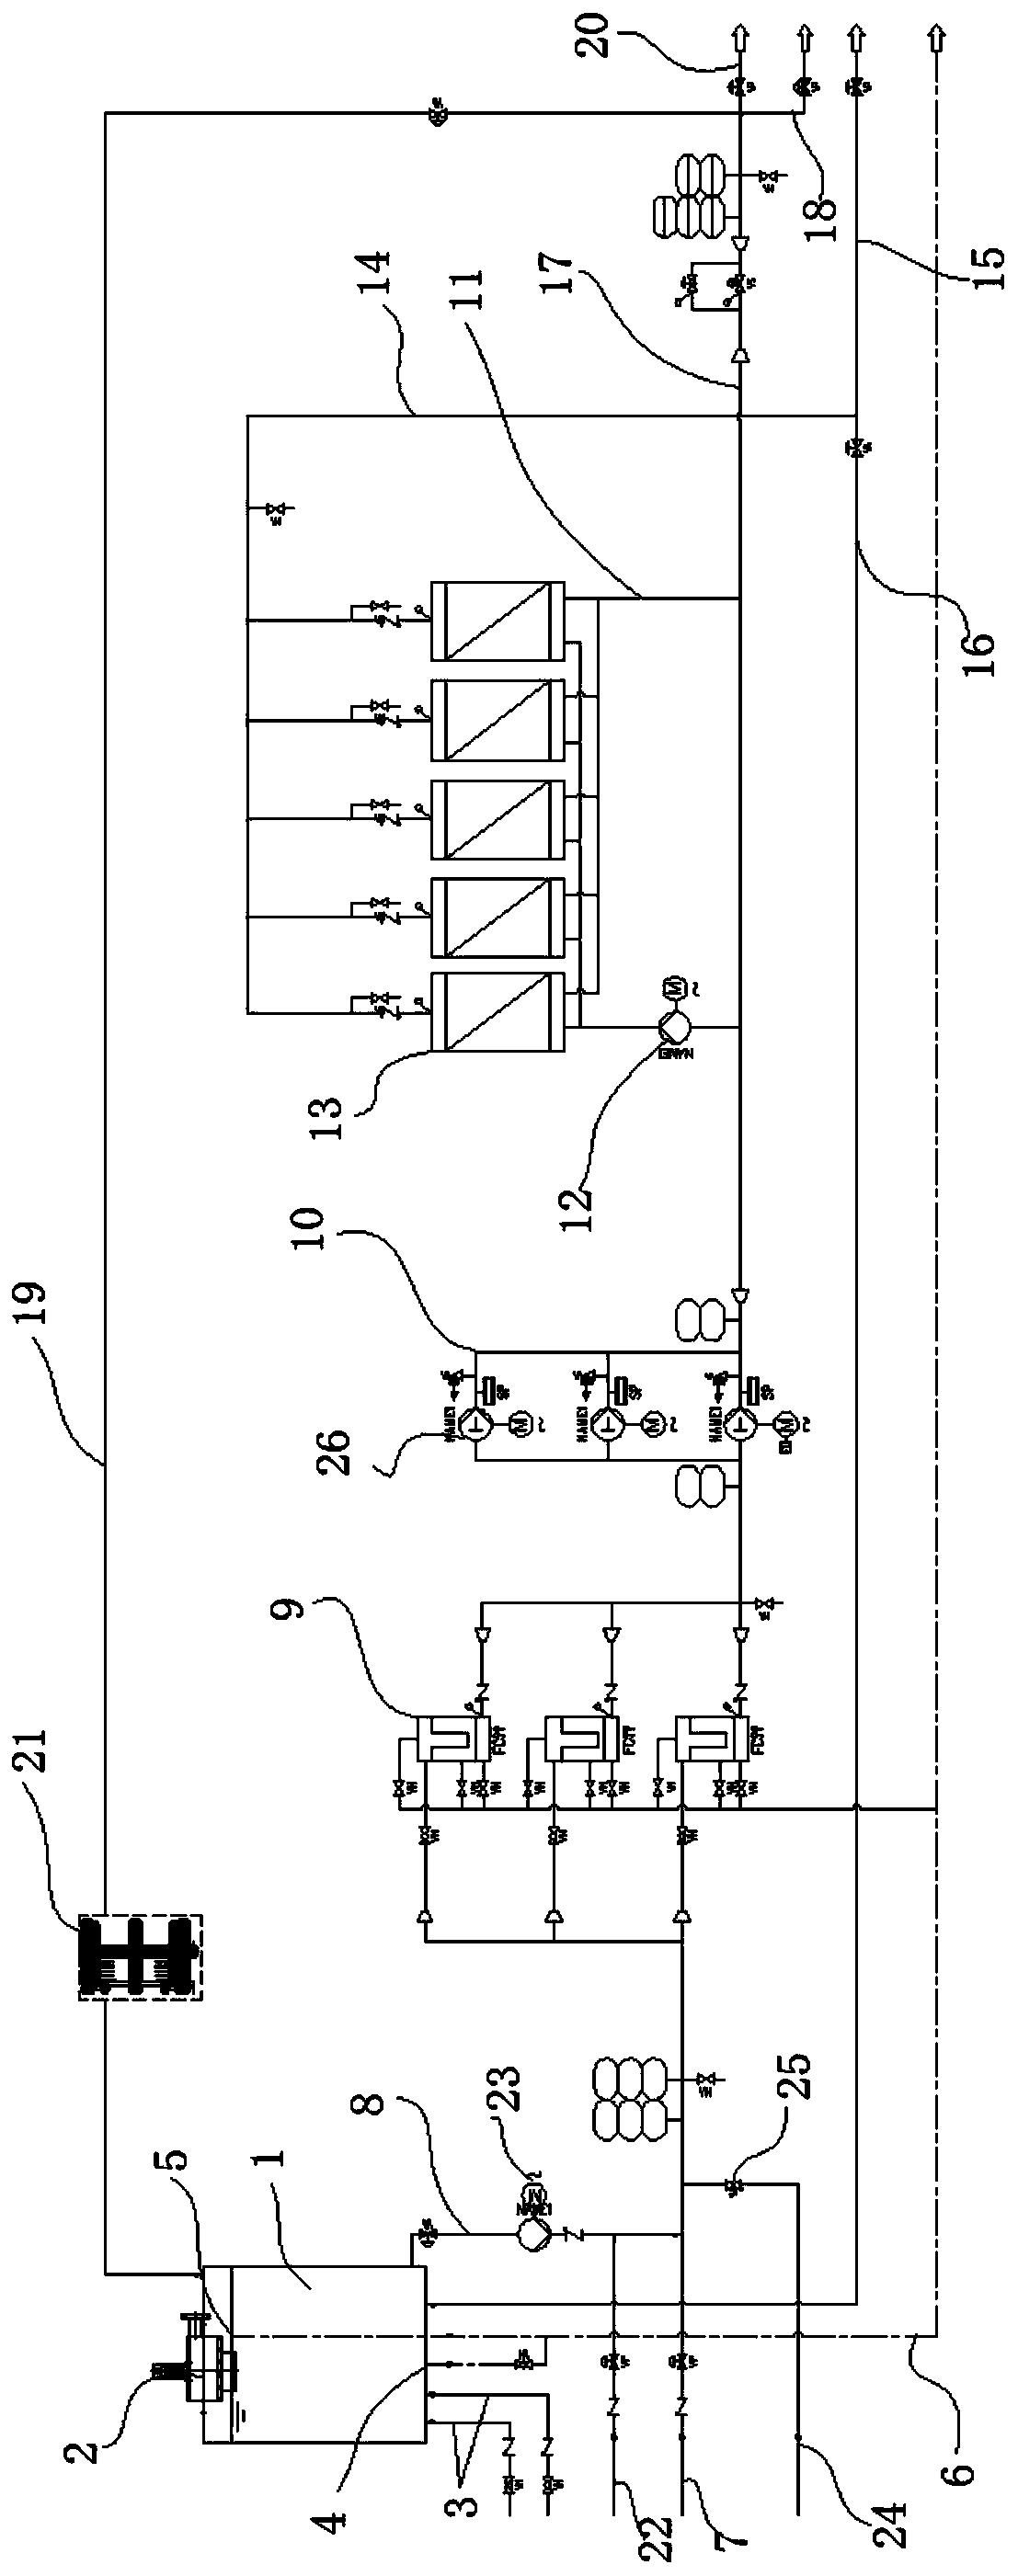 Leachate reverse osmosis treatment system and process flow thereof